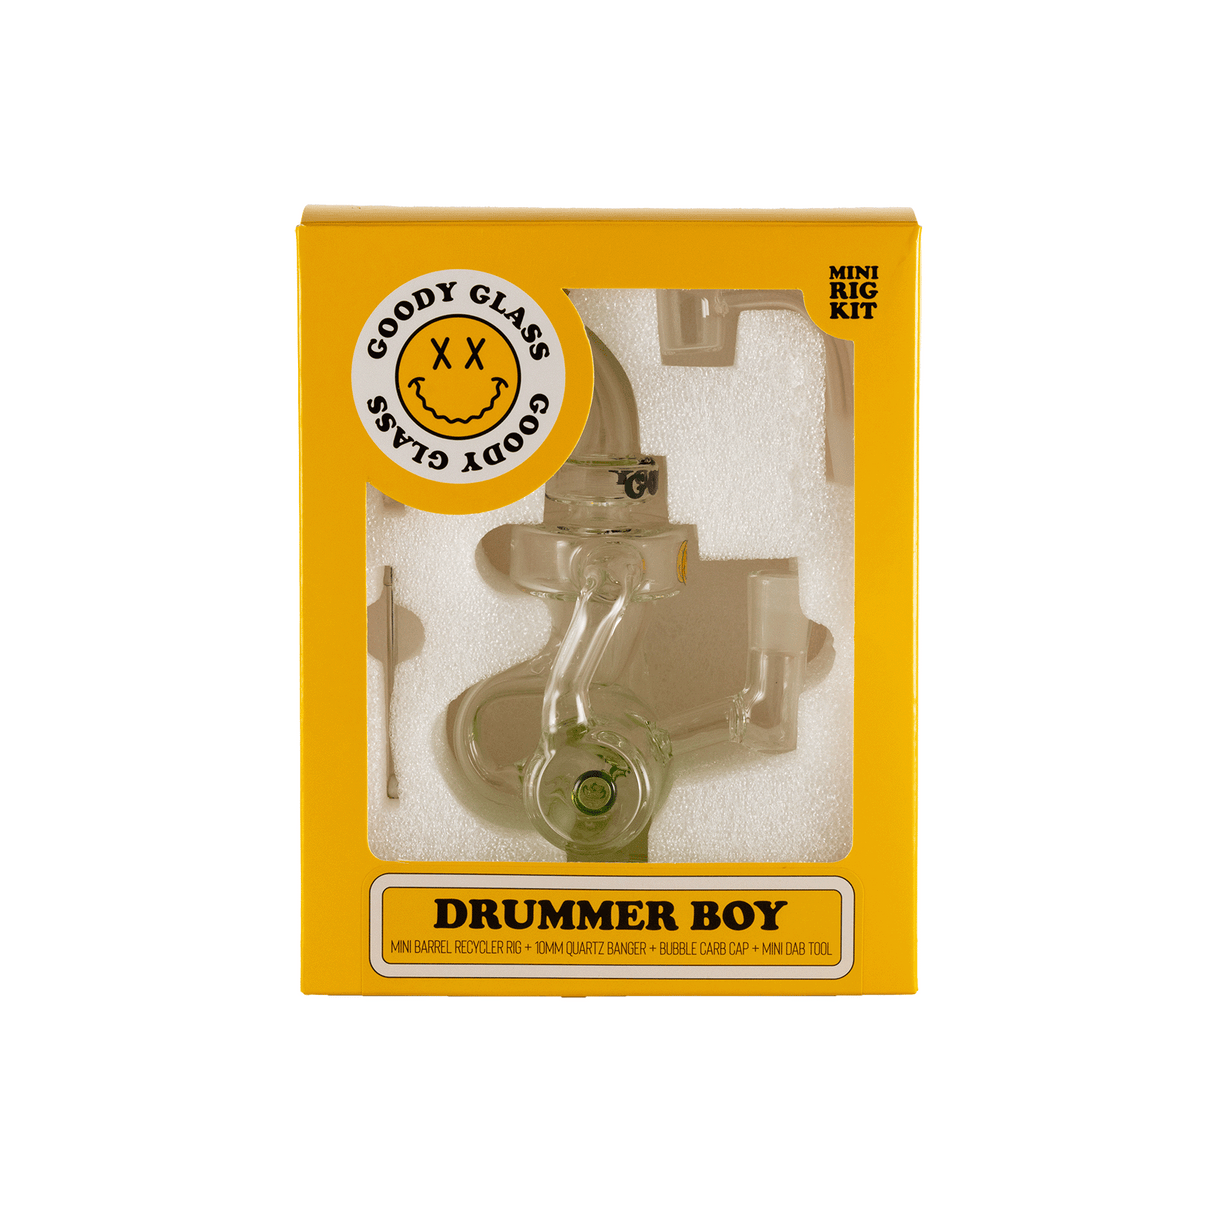 Goody Glass Drummer Boy Mini Dab Rig Kit in packaging with accessories, front view